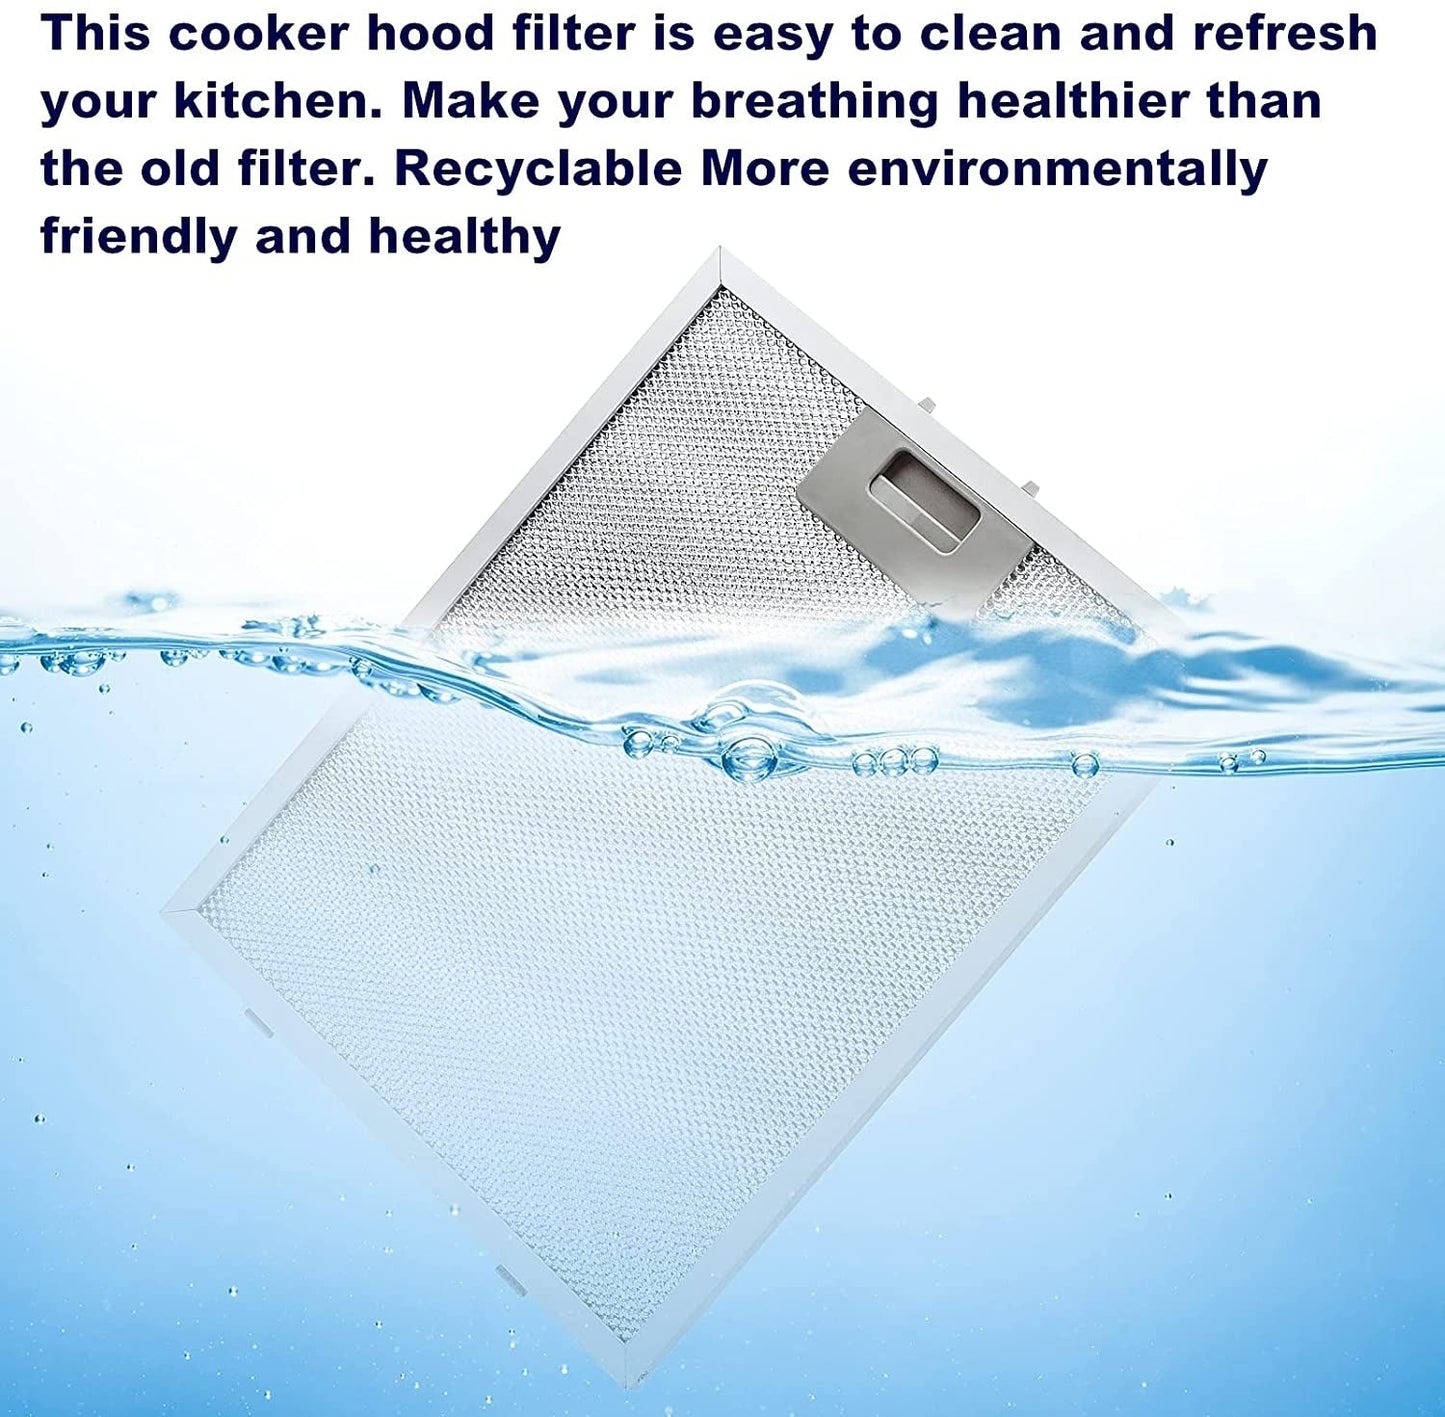 124x254 mm Filter for Hood Bosch 00746790 Extractor Filter Cooker Metal Mesh Grease Filter For Kitchen DWK06G620 DWK098G61B